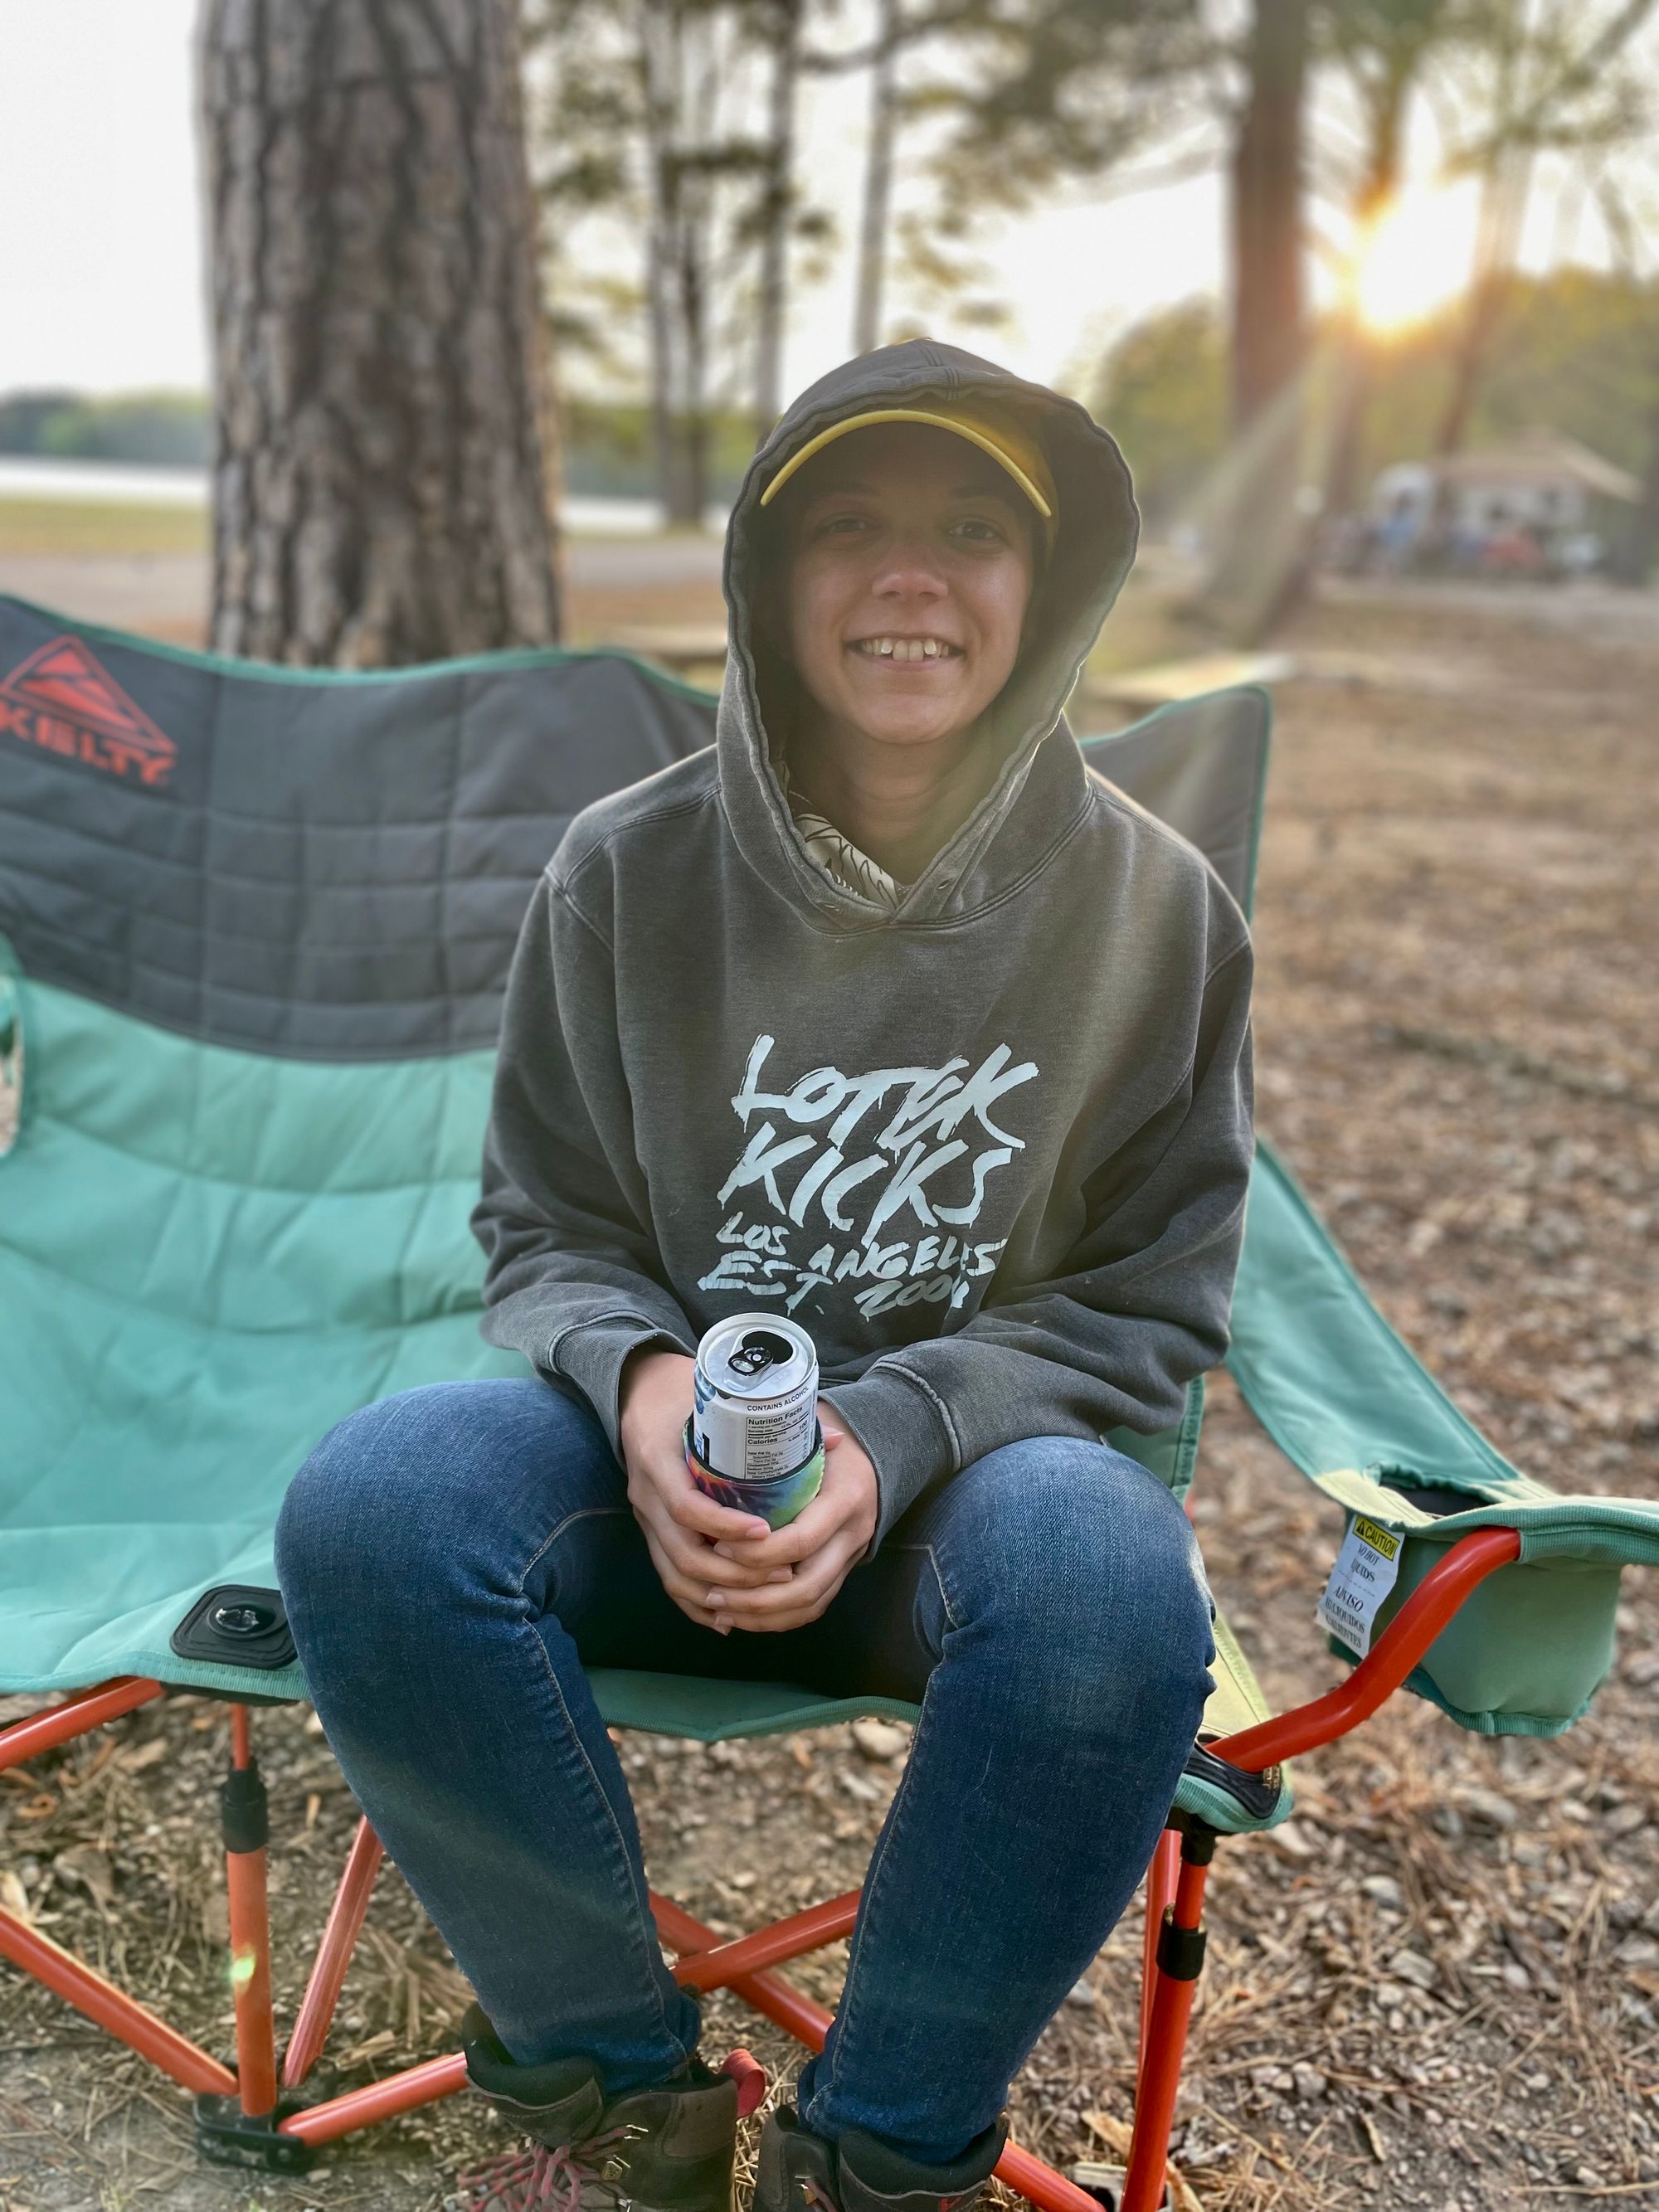 White woman sitting in loveseat camping chair. She's smiling, holding a can, and wearing a hoodie with the hood up.